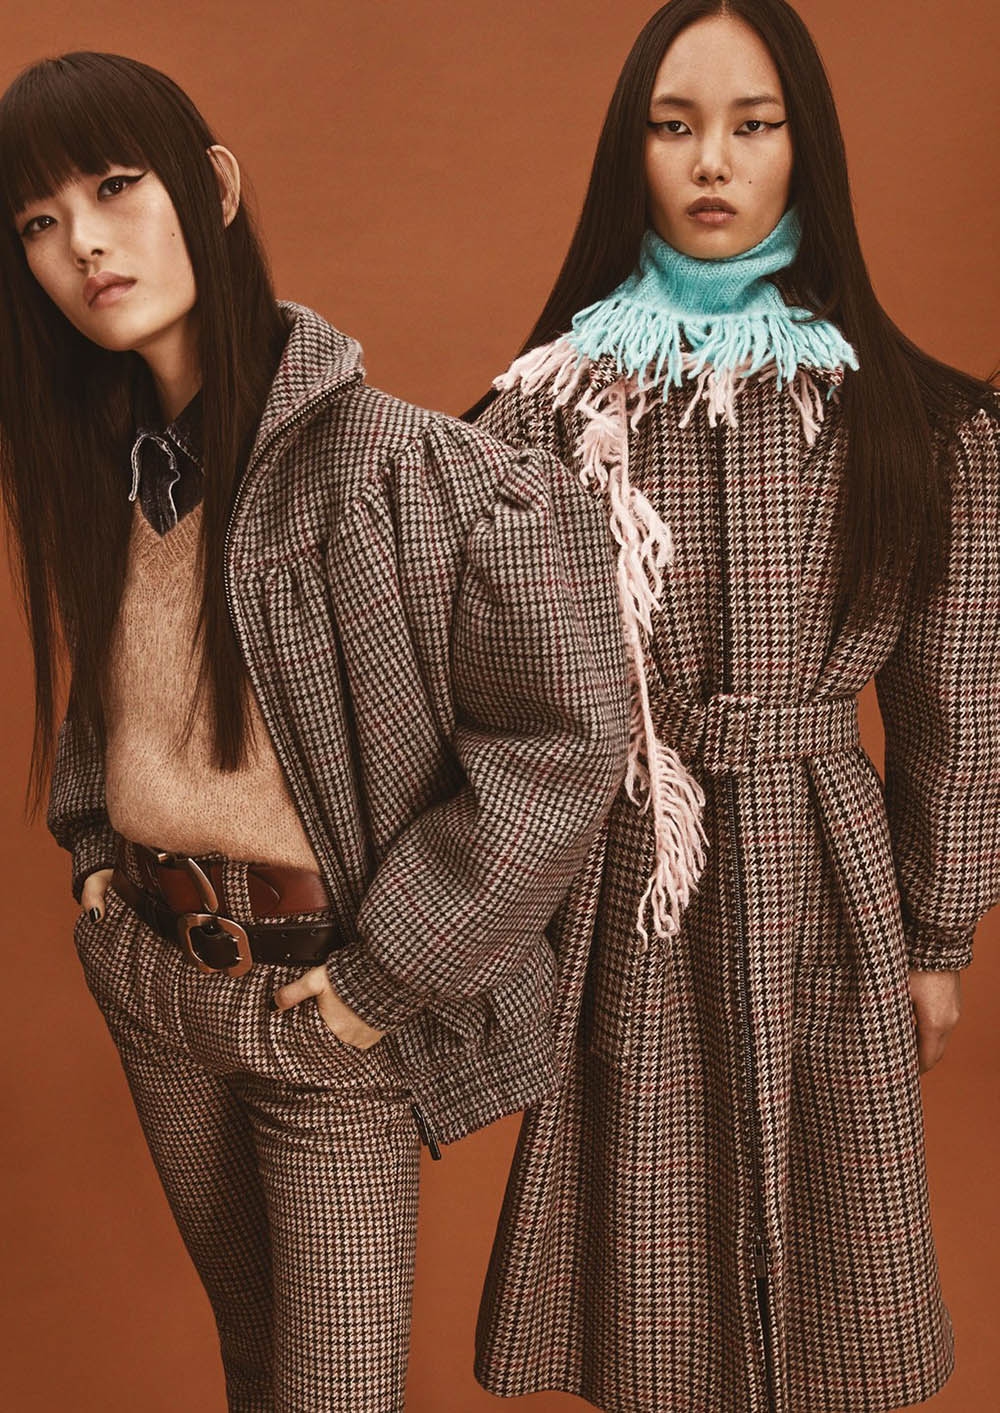 Ling Ling and Xie Chaoyu cover Glass Magazine Autumn 2018 by Alex Bramall